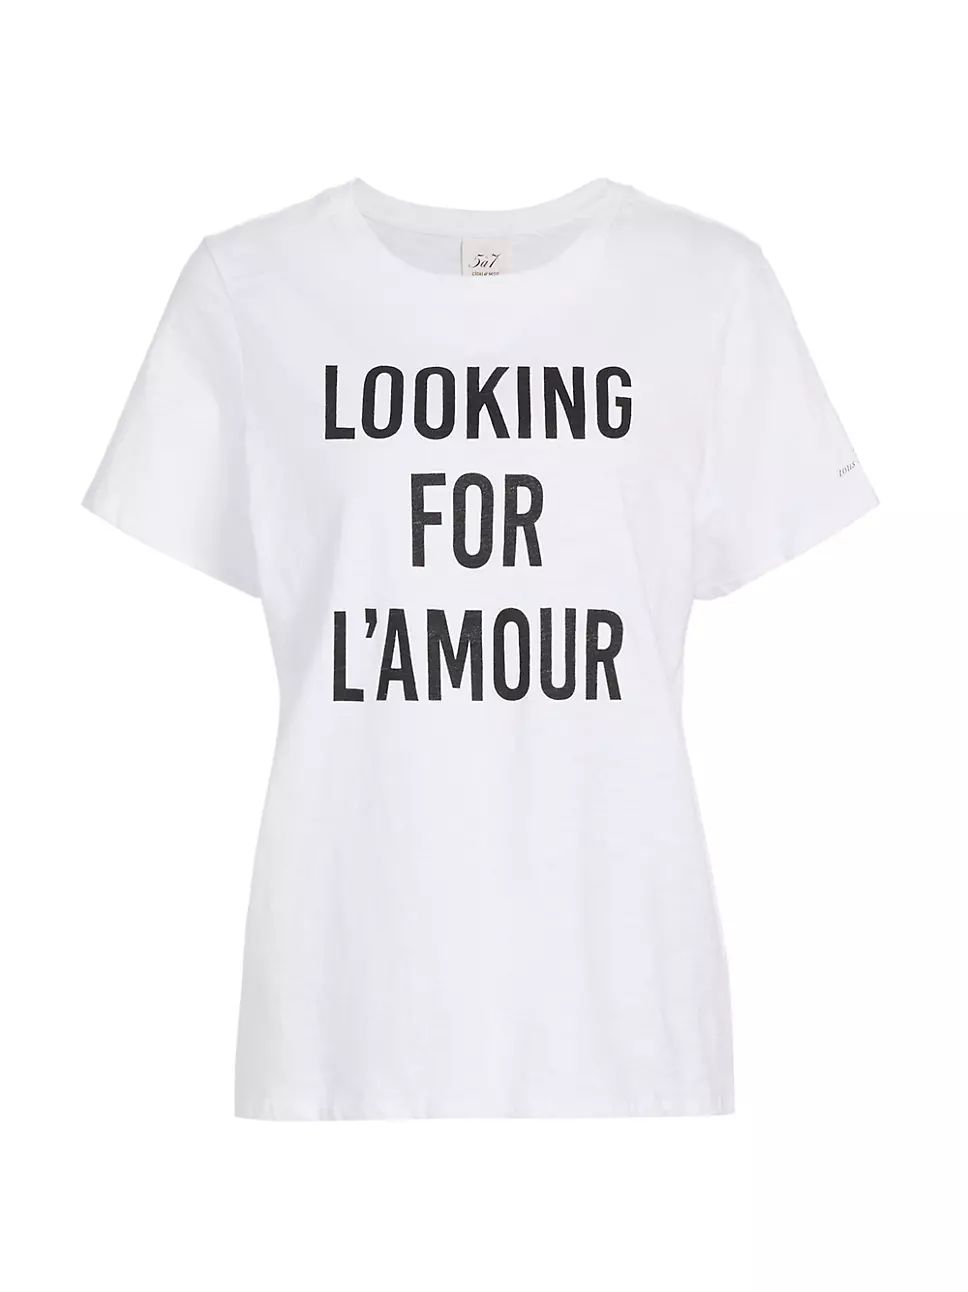 Looking For L'Amour Short-Sleeve T-Shirt | Saks Fifth Avenue